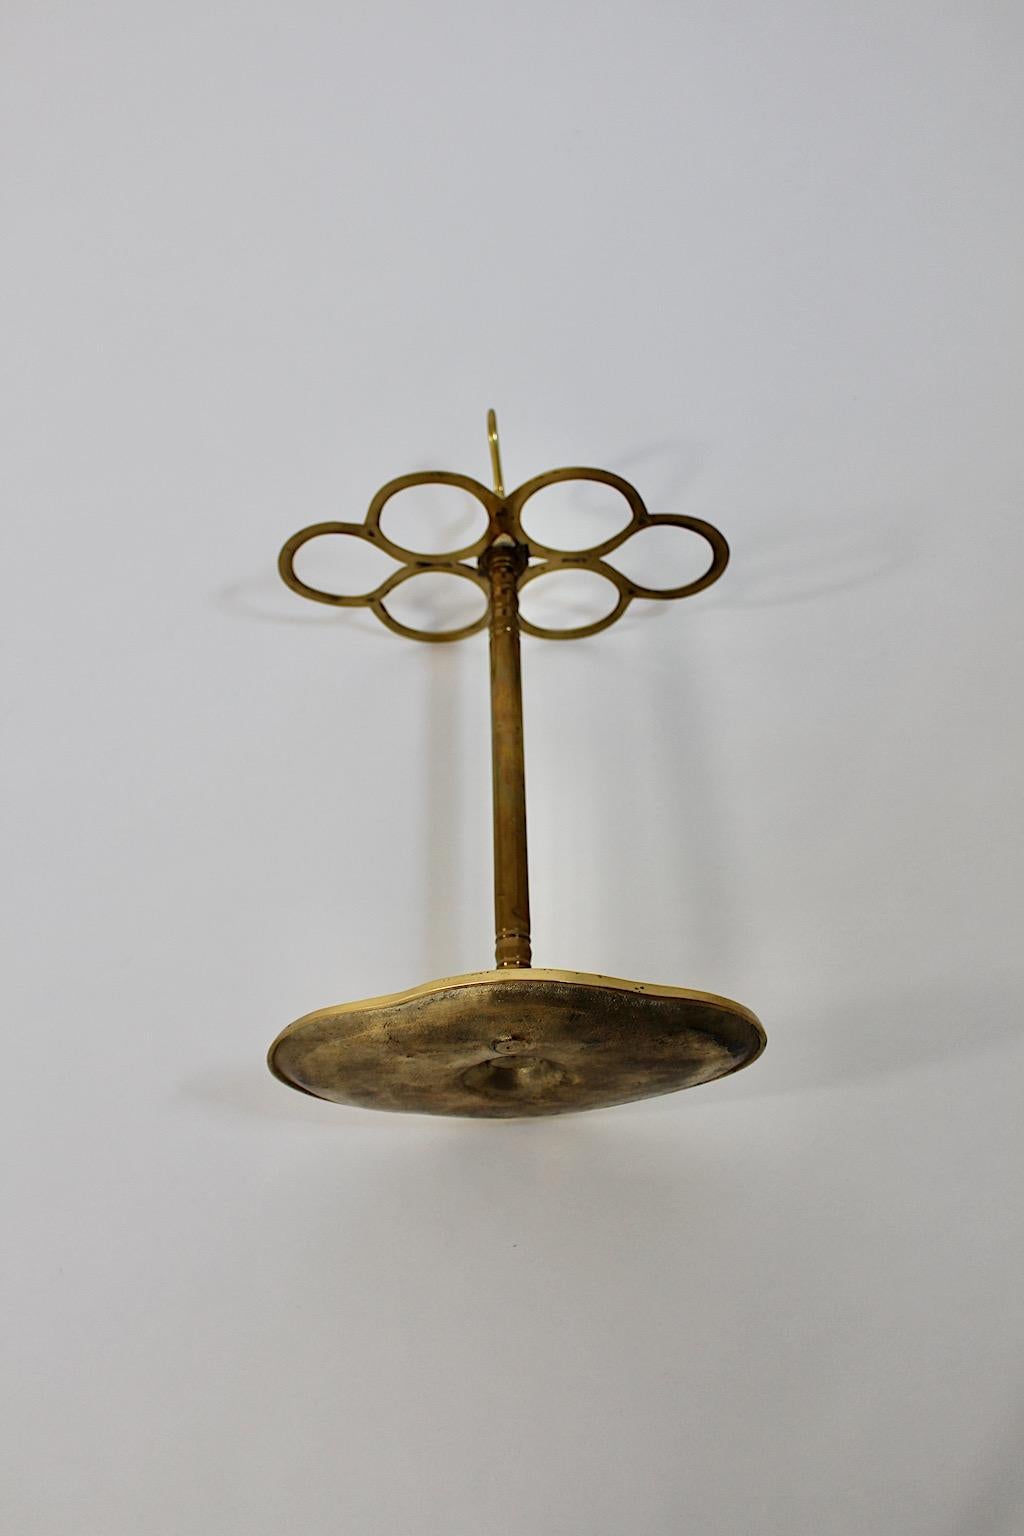 20th Century Hollywood Regency Style Vintage Brass Umbrella Stand Cane Holder 1970s Italy For Sale